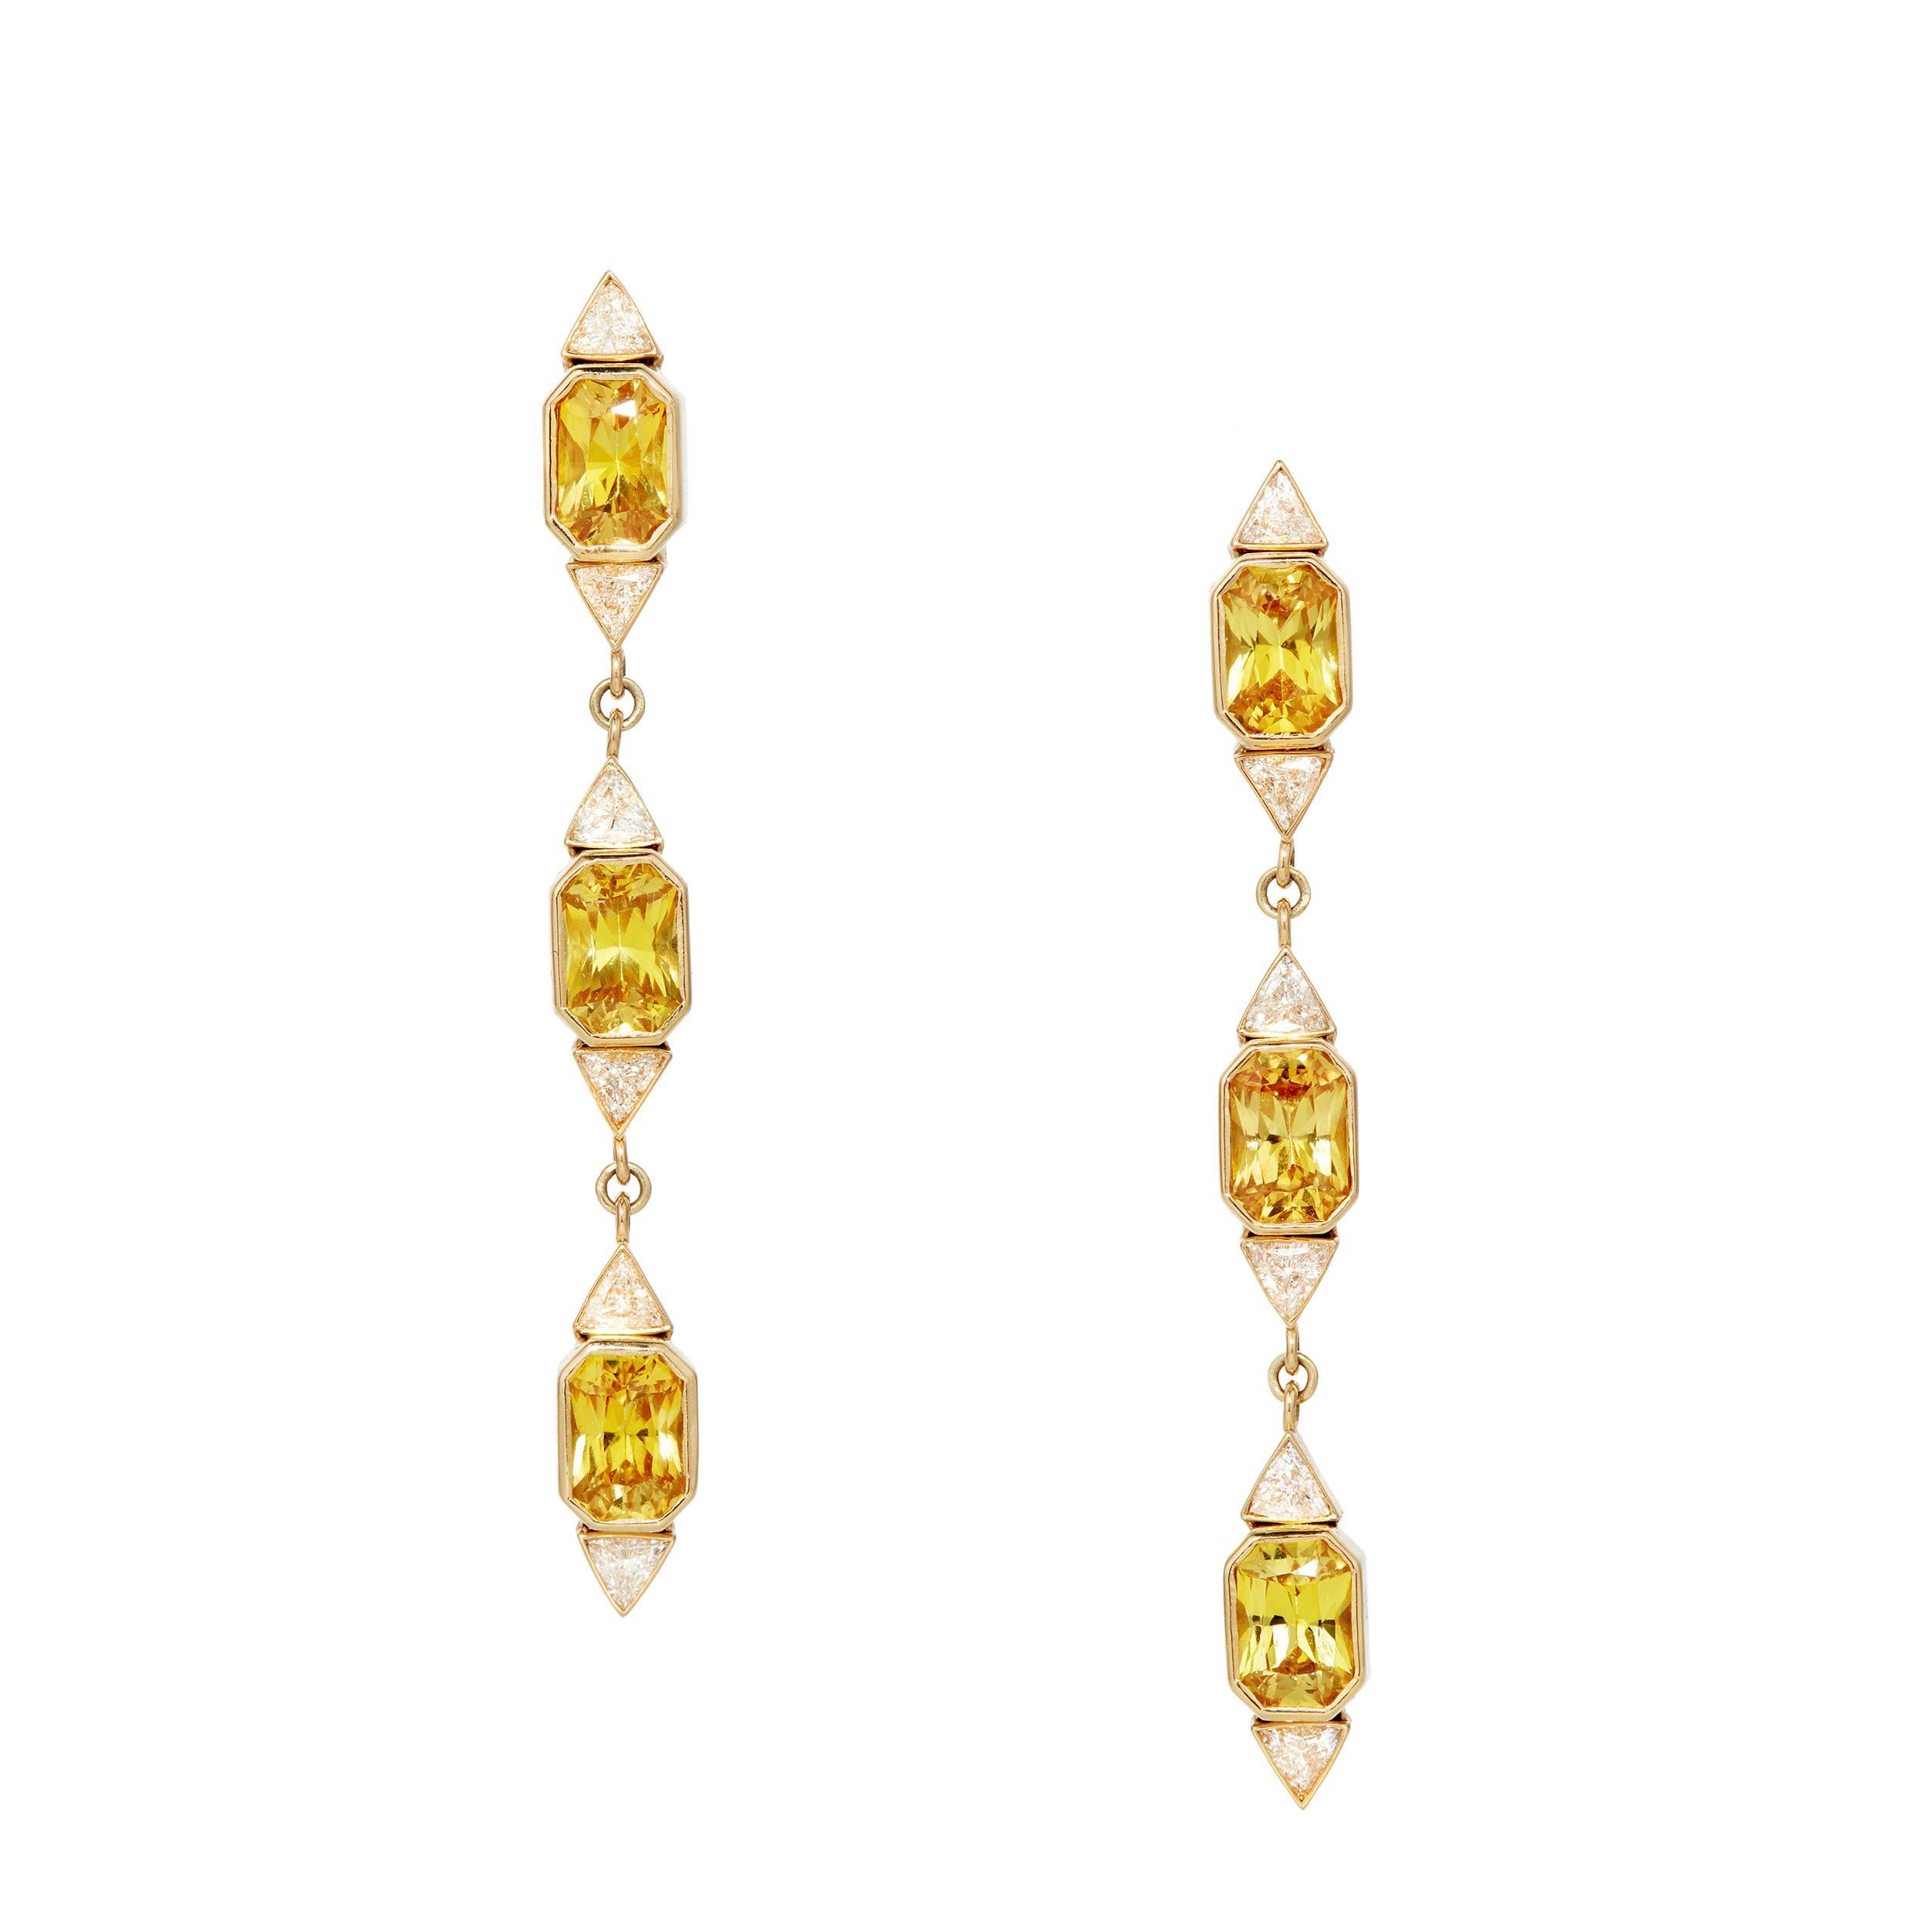 3.25 Carats Radiant Cut Yellow Sapphire and Trillion Diamond Earrings in 18K YG